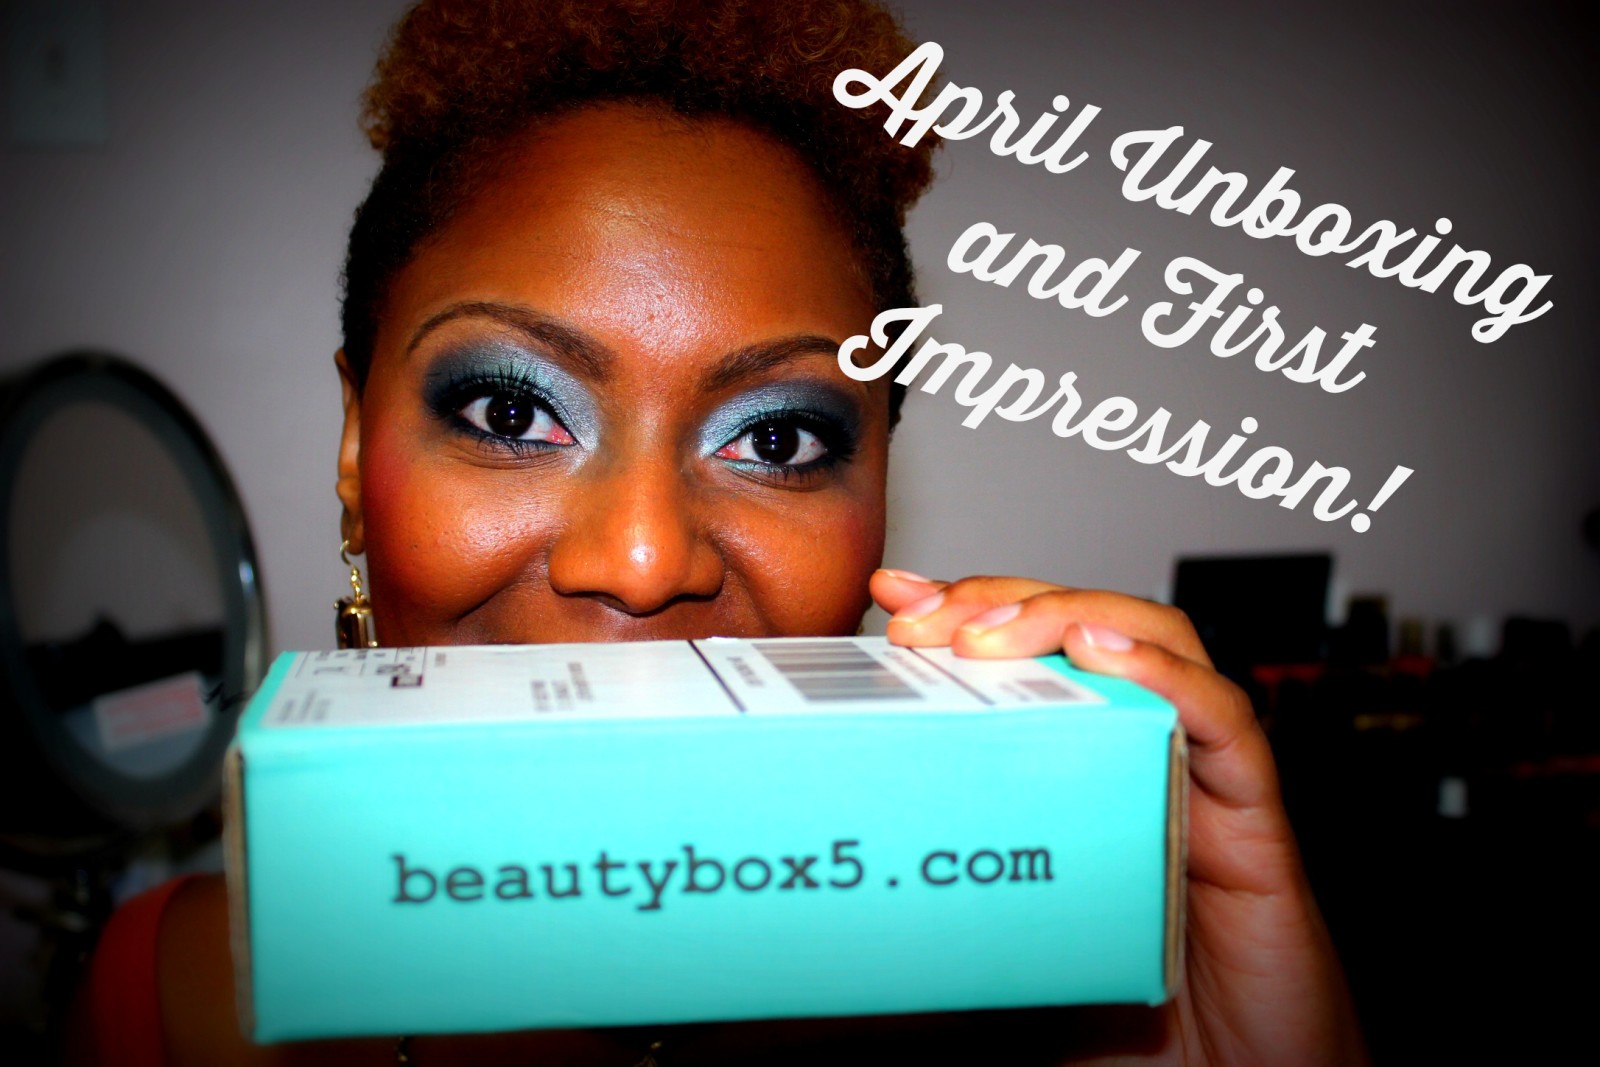 April Beauty Box 5 Unboxing and First Impression Video